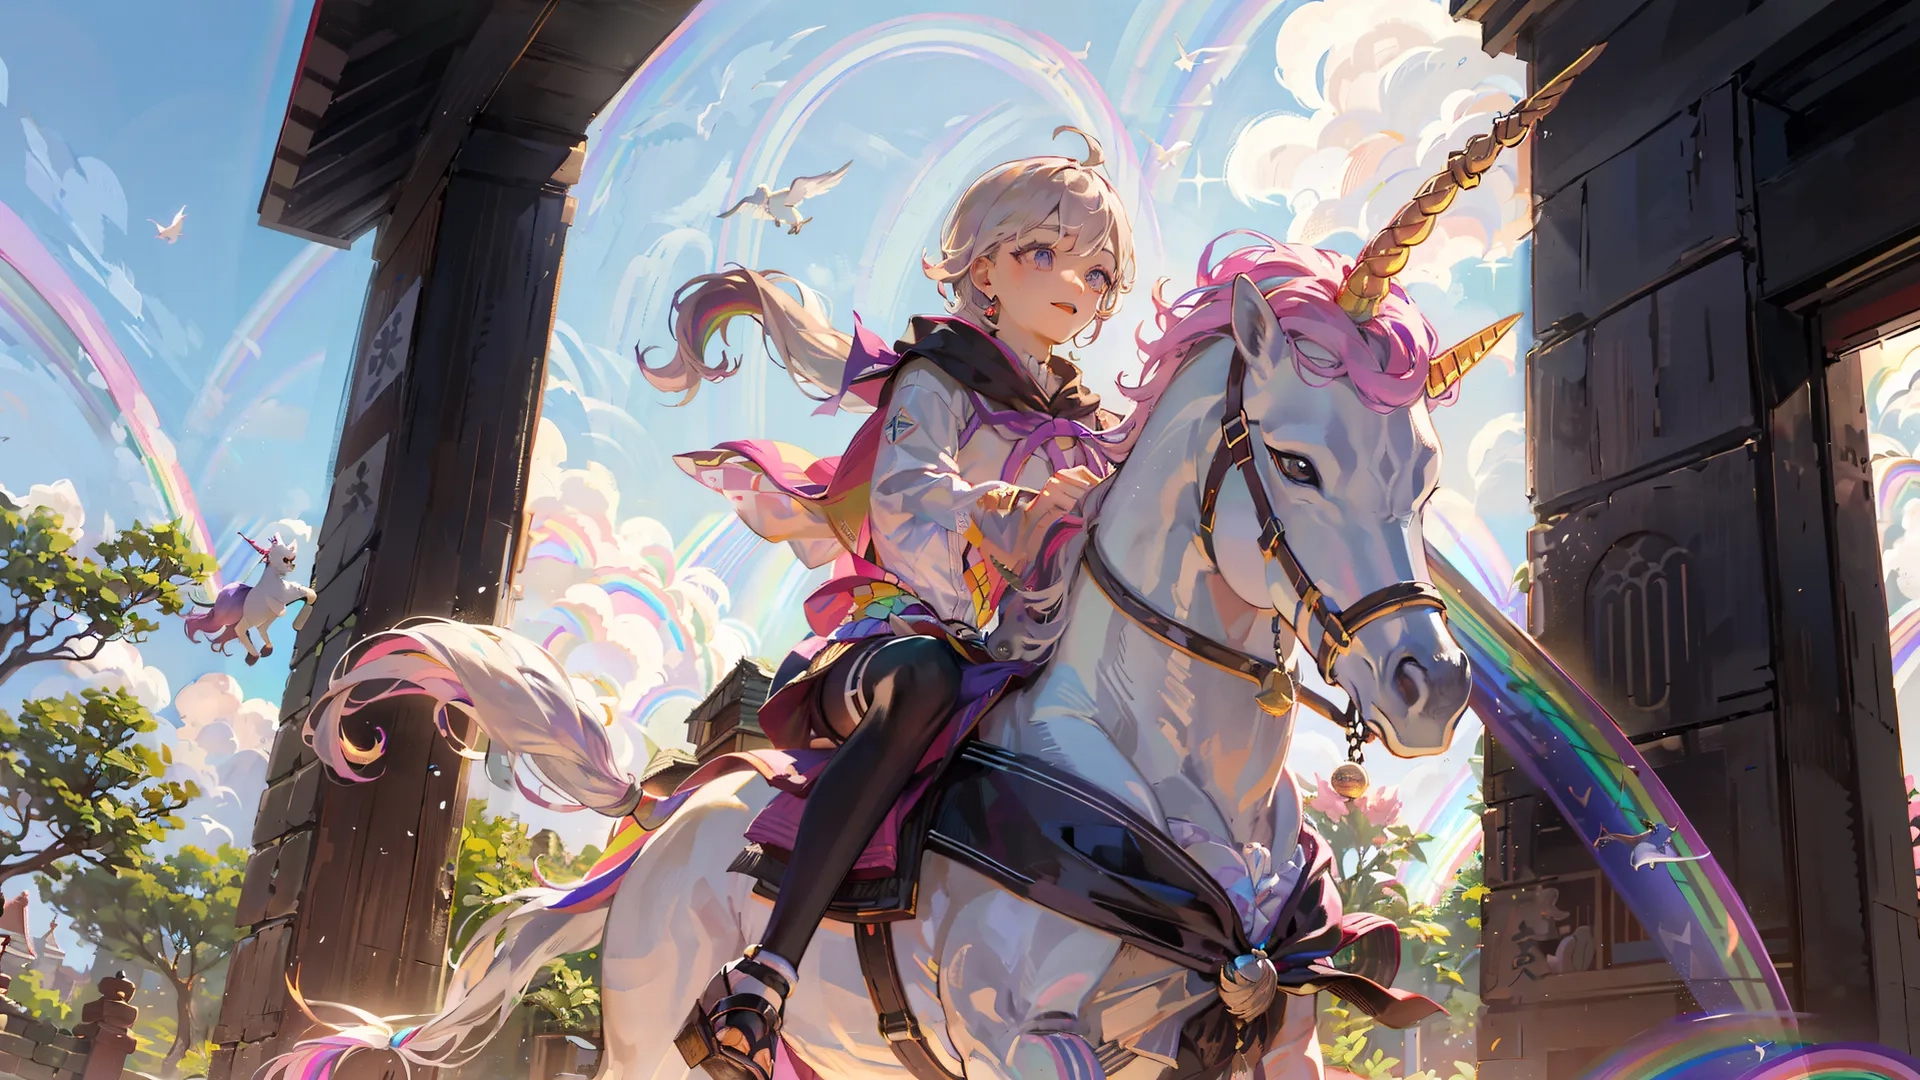 a girl with blonde hair riding on top of a white horse and being ridden by a unicorn next to a rainbow bubble filled window or arch
